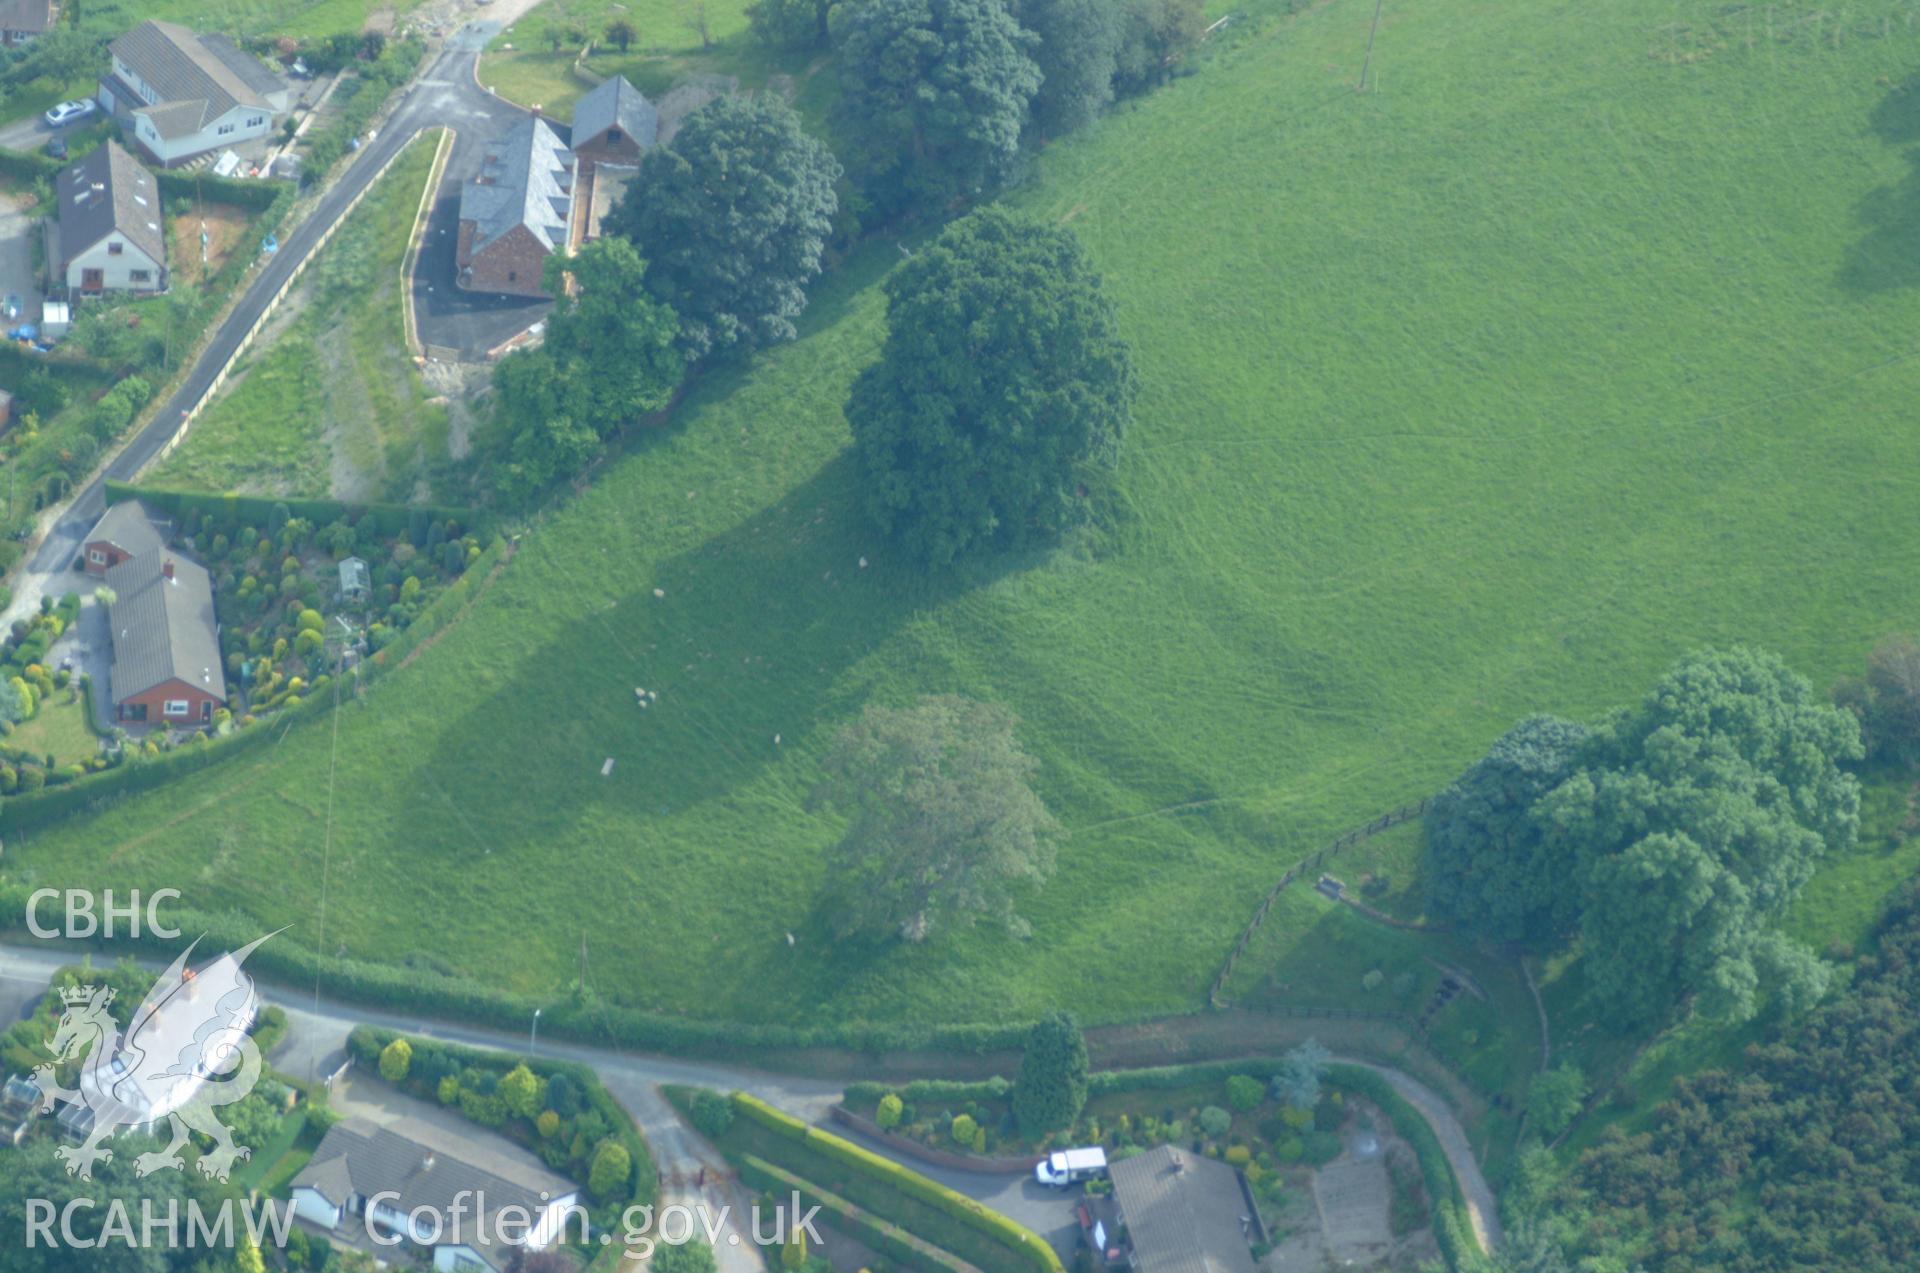 RCAHMW colour oblique aerial photograph of field terracing at Llanfyllin. Taken on 08 June 2004 by Toby Driver